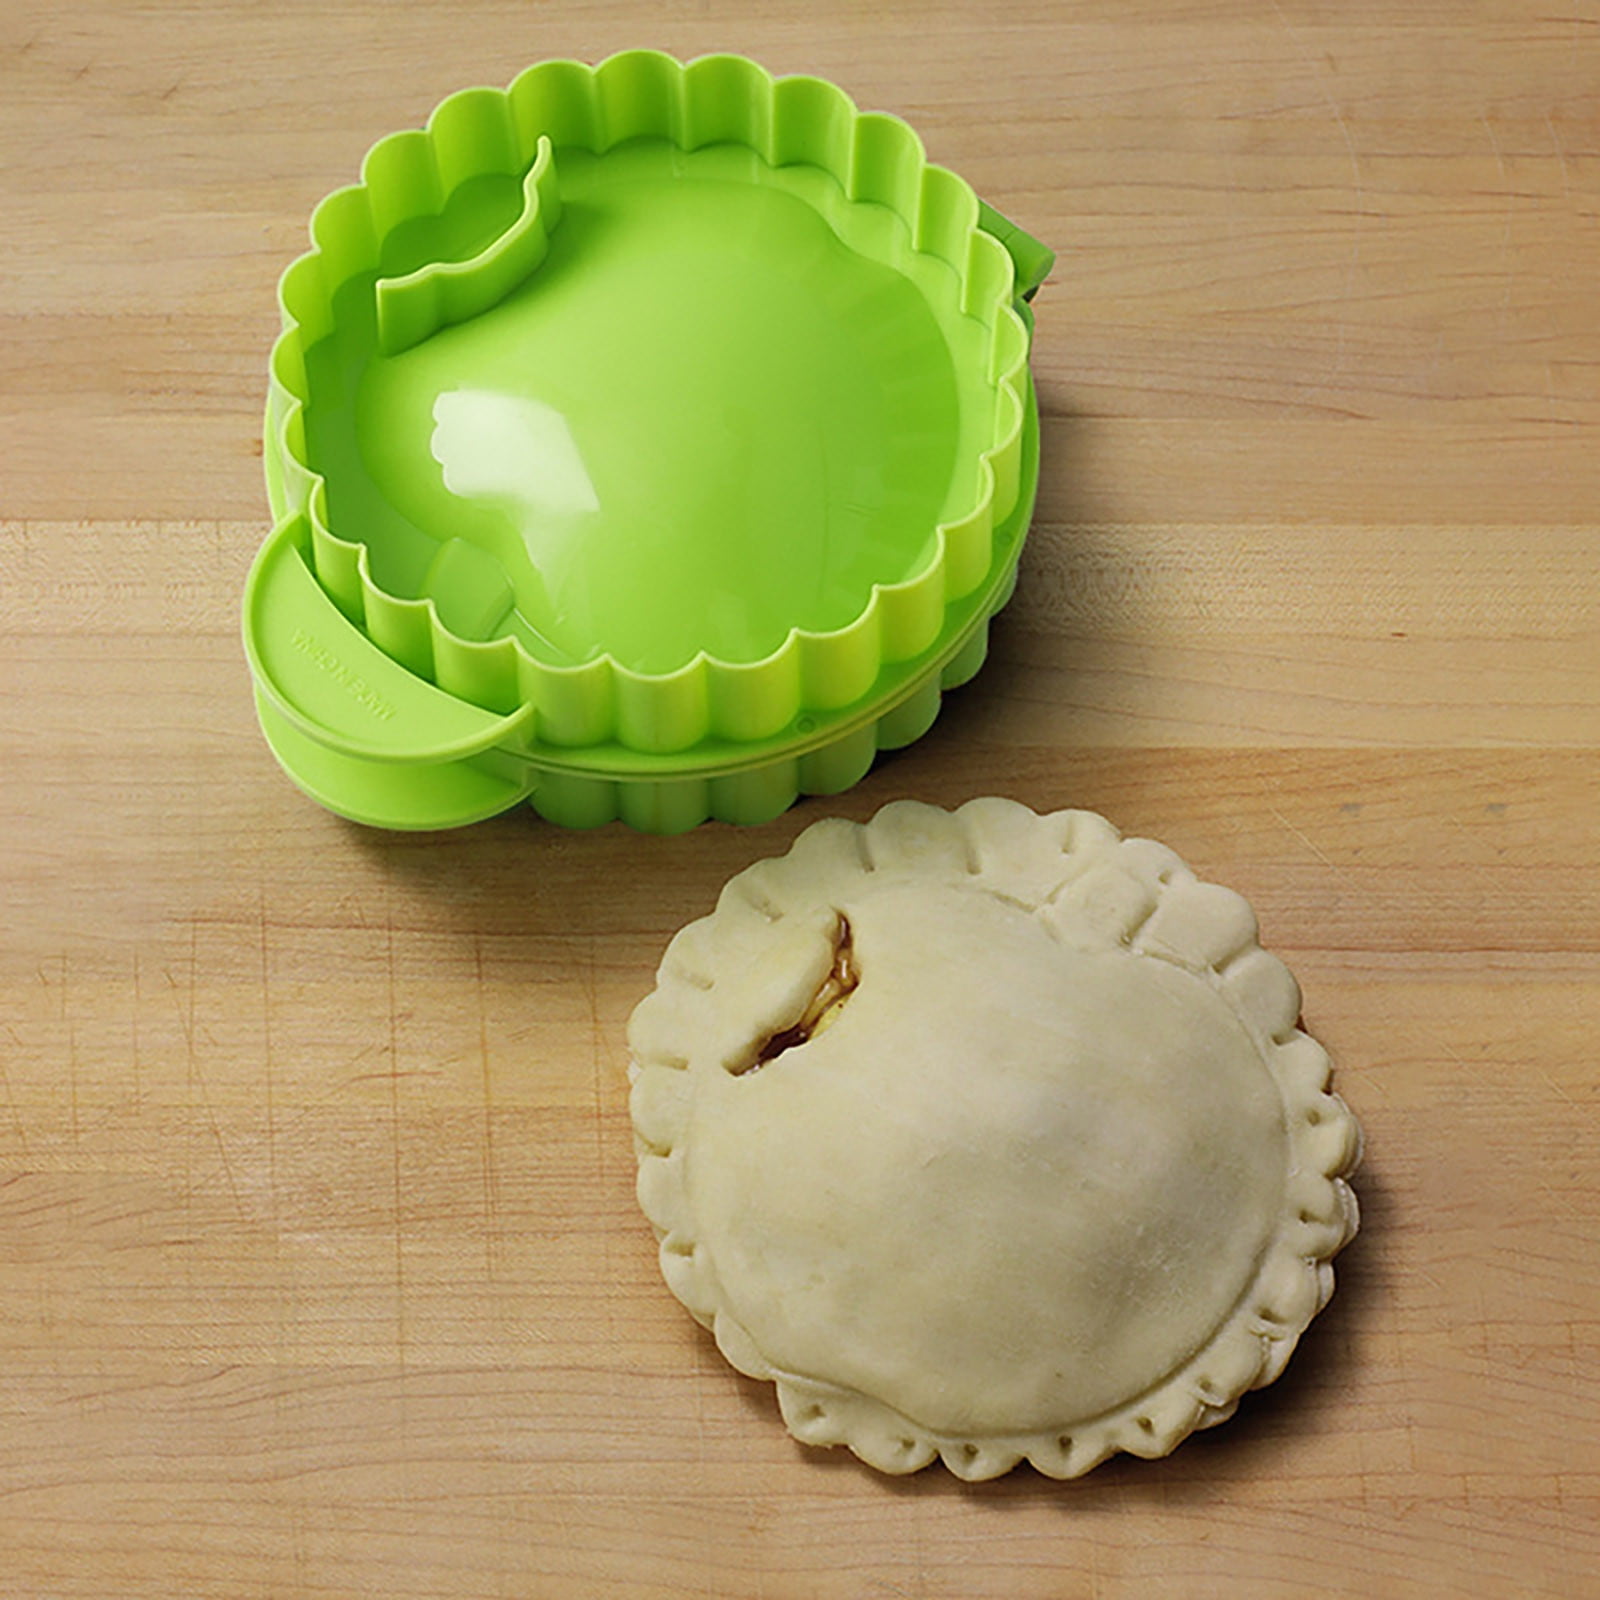 Dash Mini Pie Maker with non stick Pie Plates. Recipes Included Box damaged  for sale online